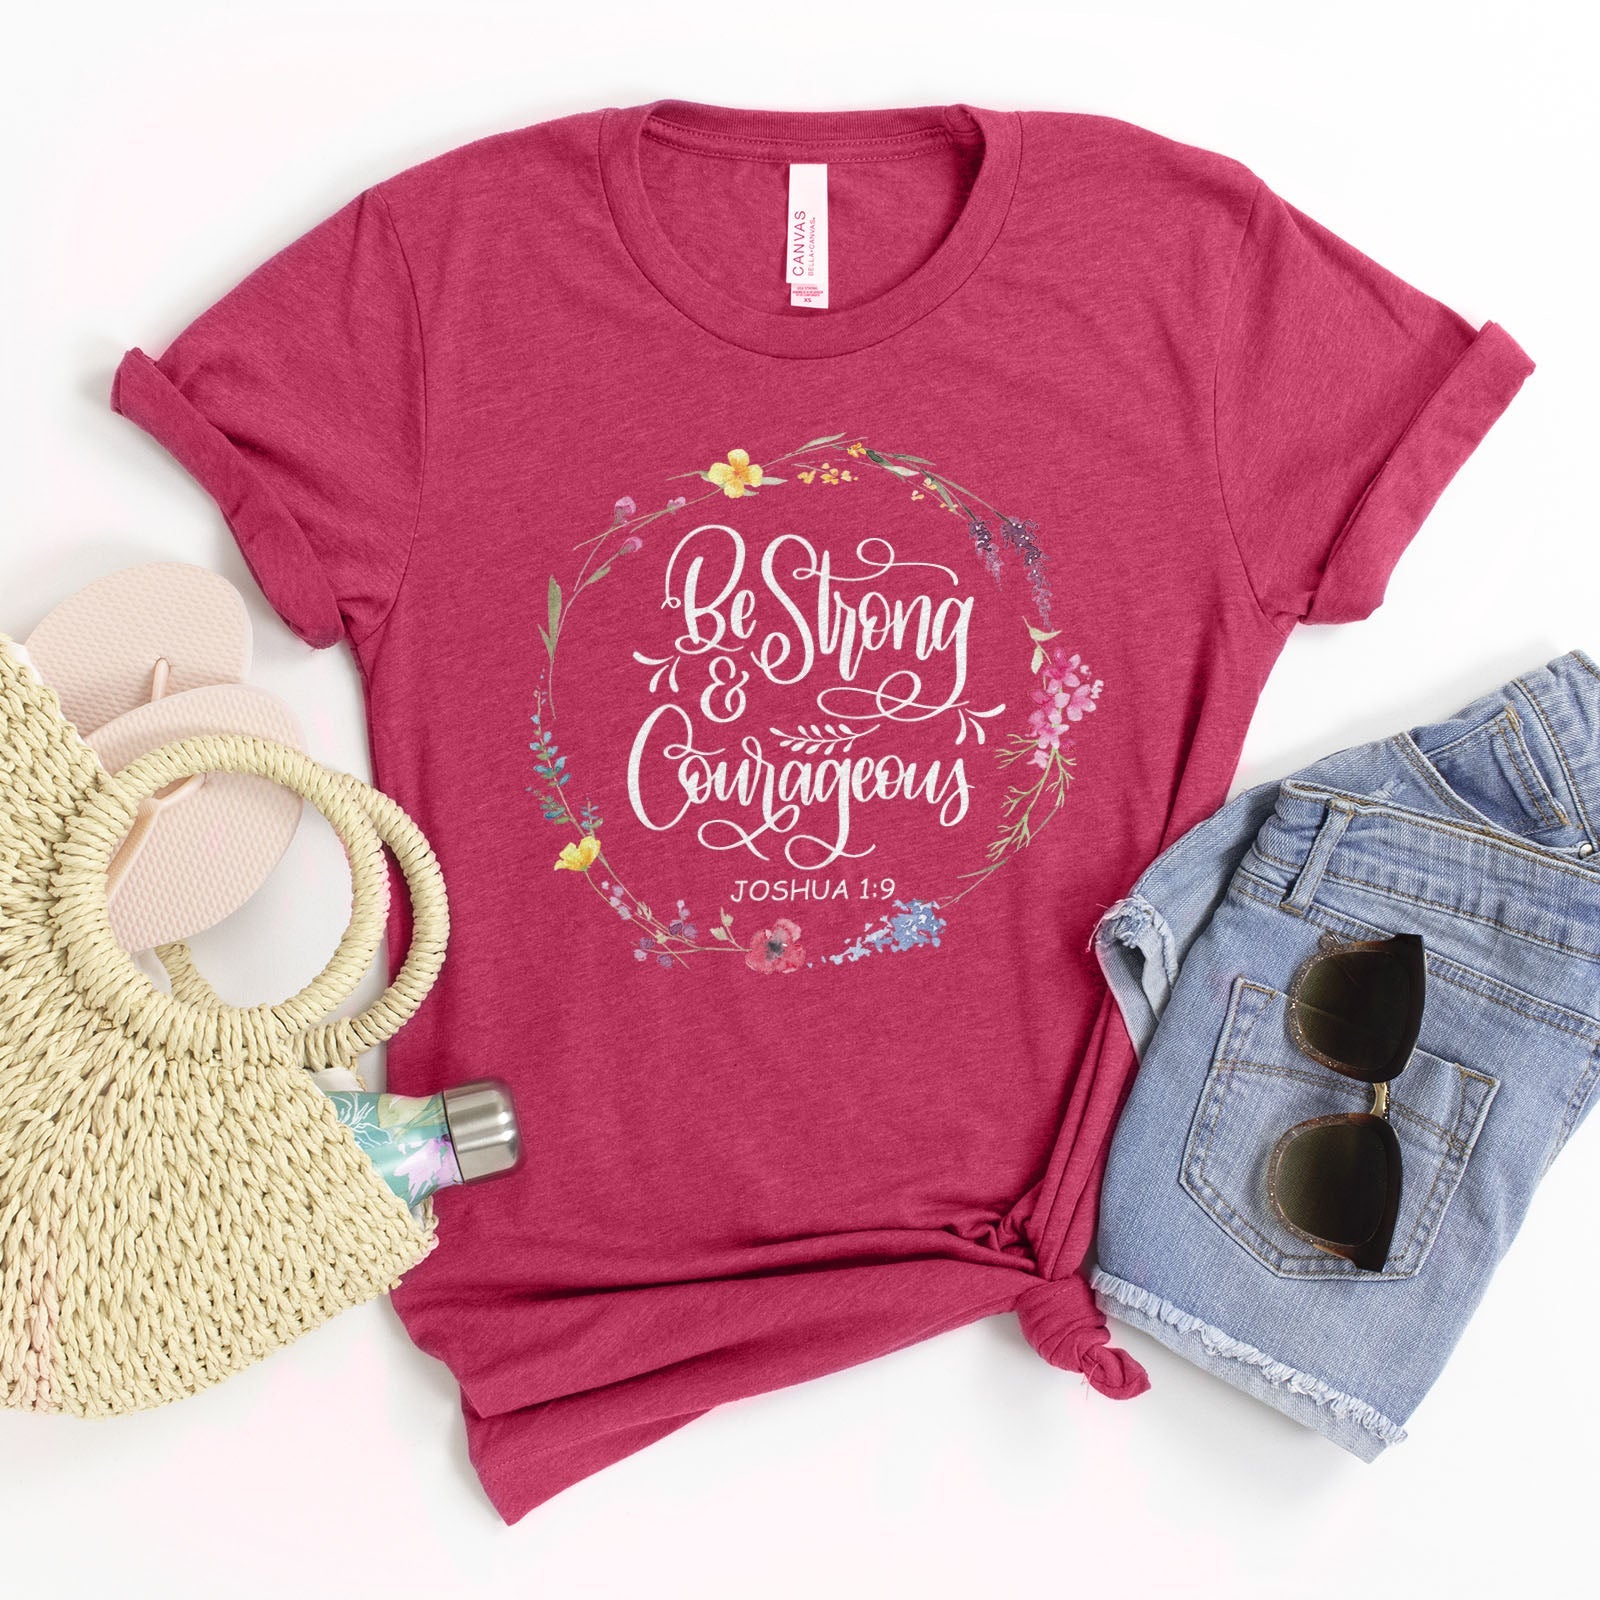 Be Strong and Courageous Joshua 1:9 Tee Shirts For Women - Christian Shirts for Women - Religious Tee Shirts